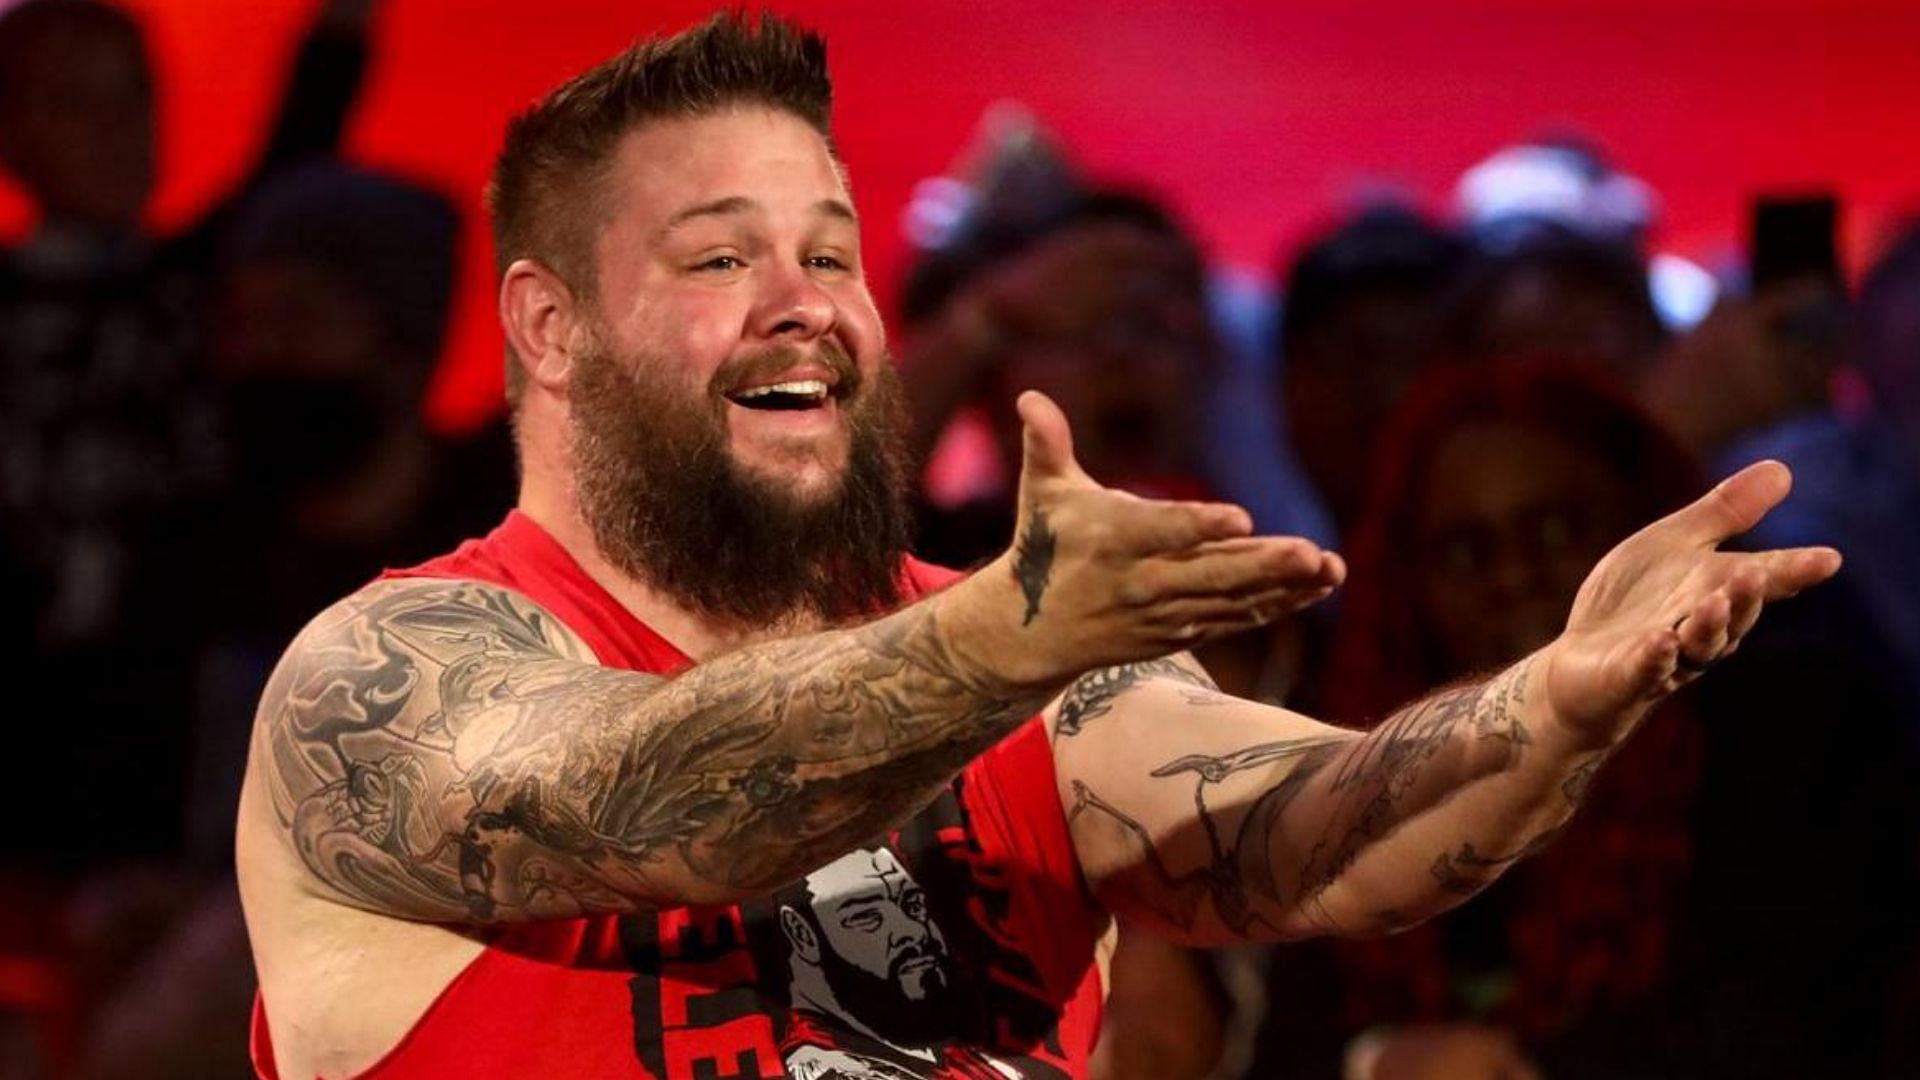 WWE RAW Superstar Kevin Owens during a show